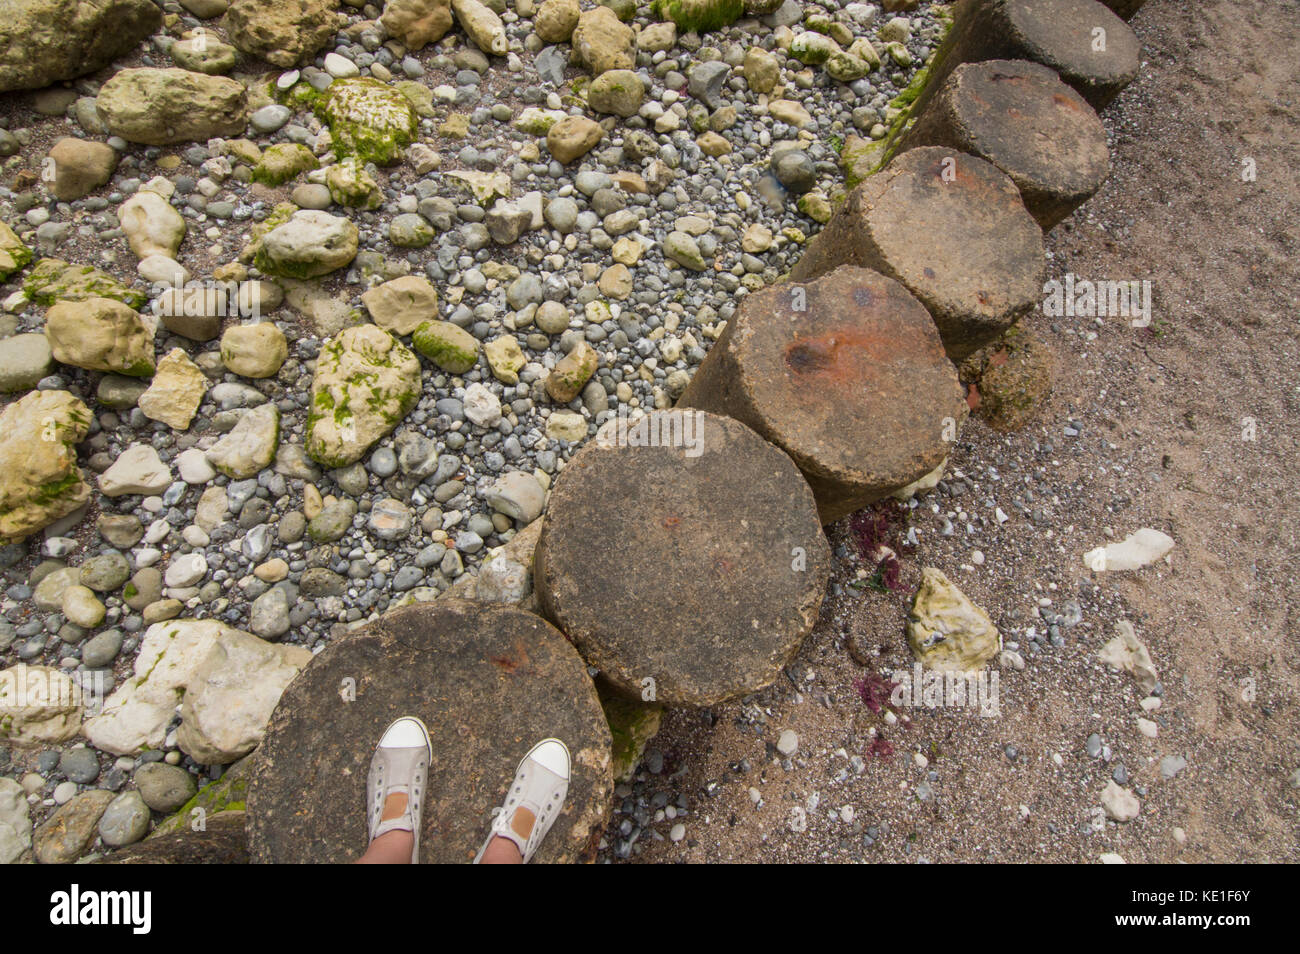 Stepping stones on the beach, point of view and perspective - photo Stock Photo